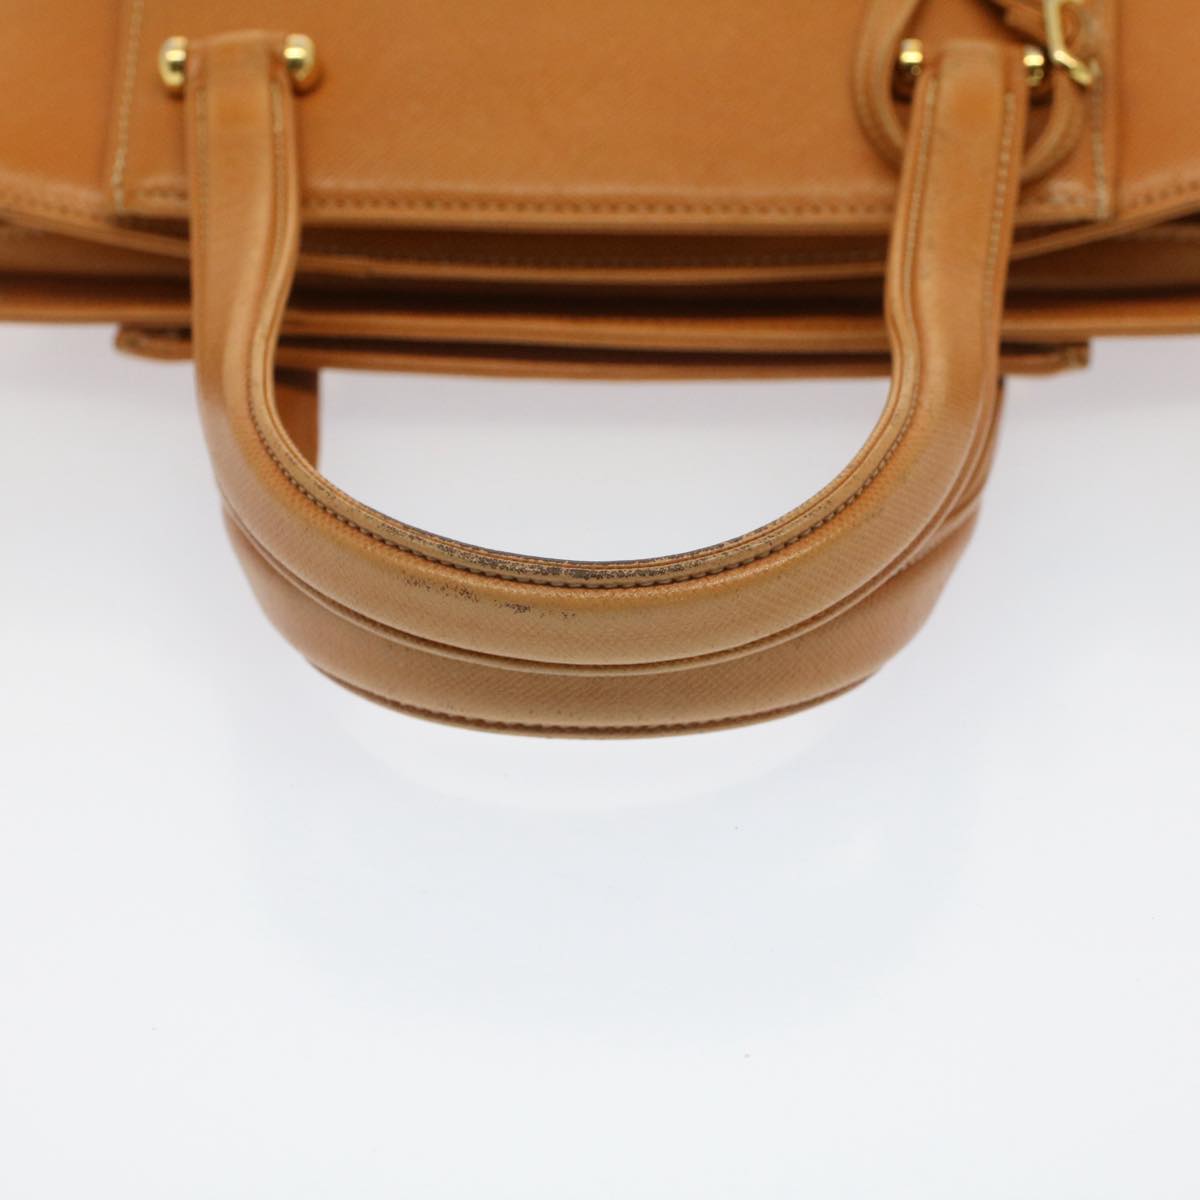 VALENTINO Hand Bag Leather Brown Auth bs7870